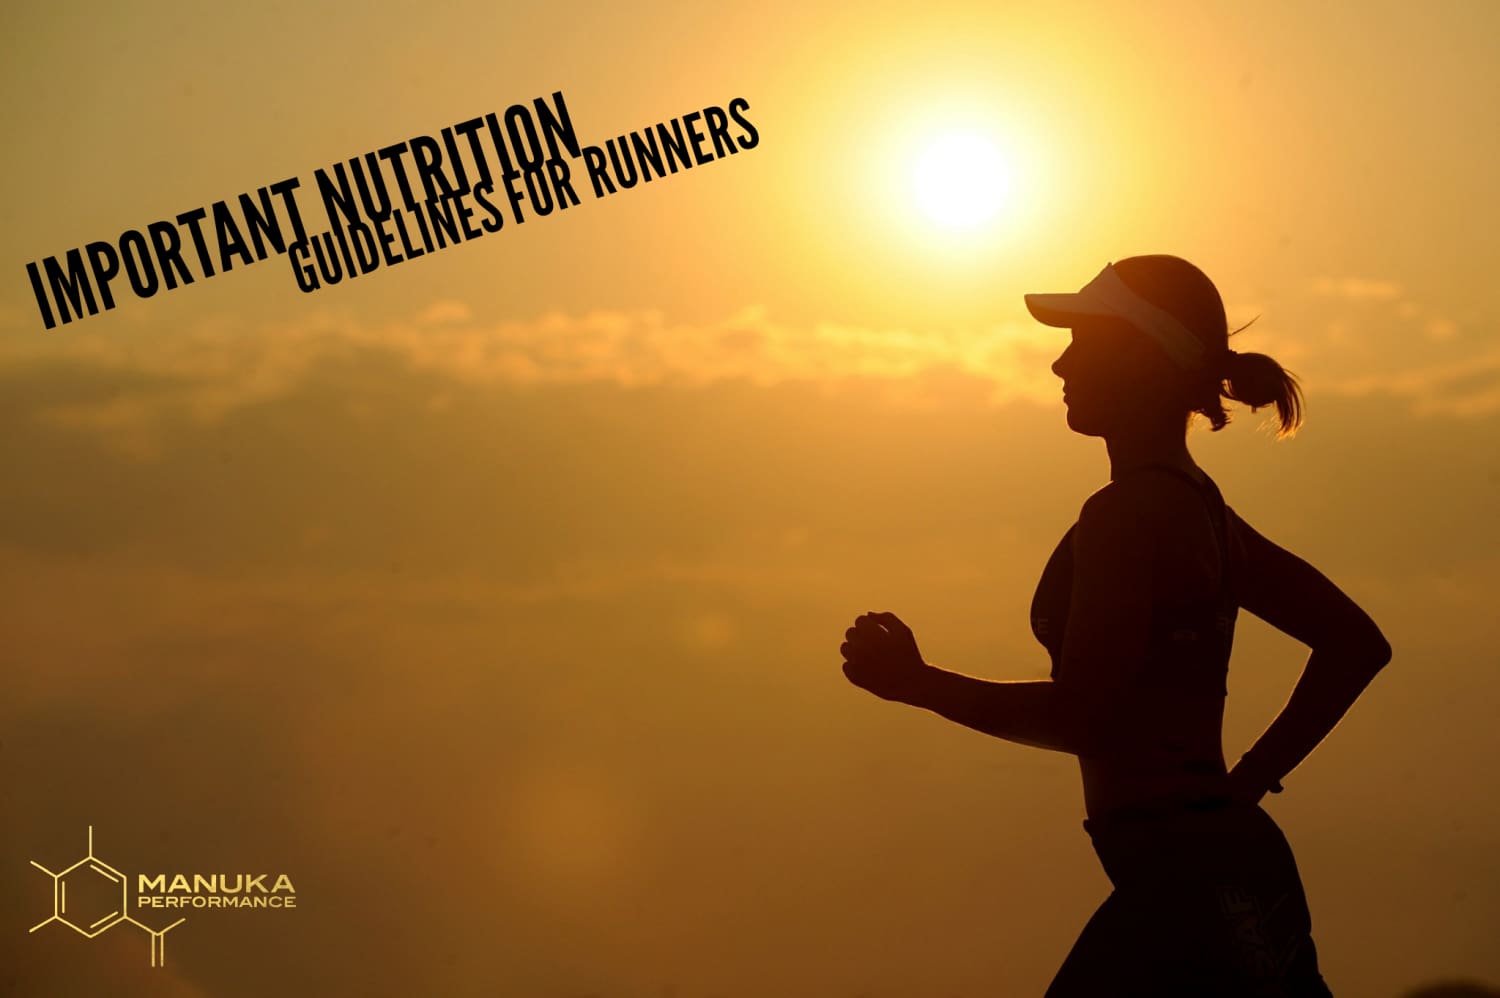 Manuka Performance Guidelines for Re-fueling after a run.